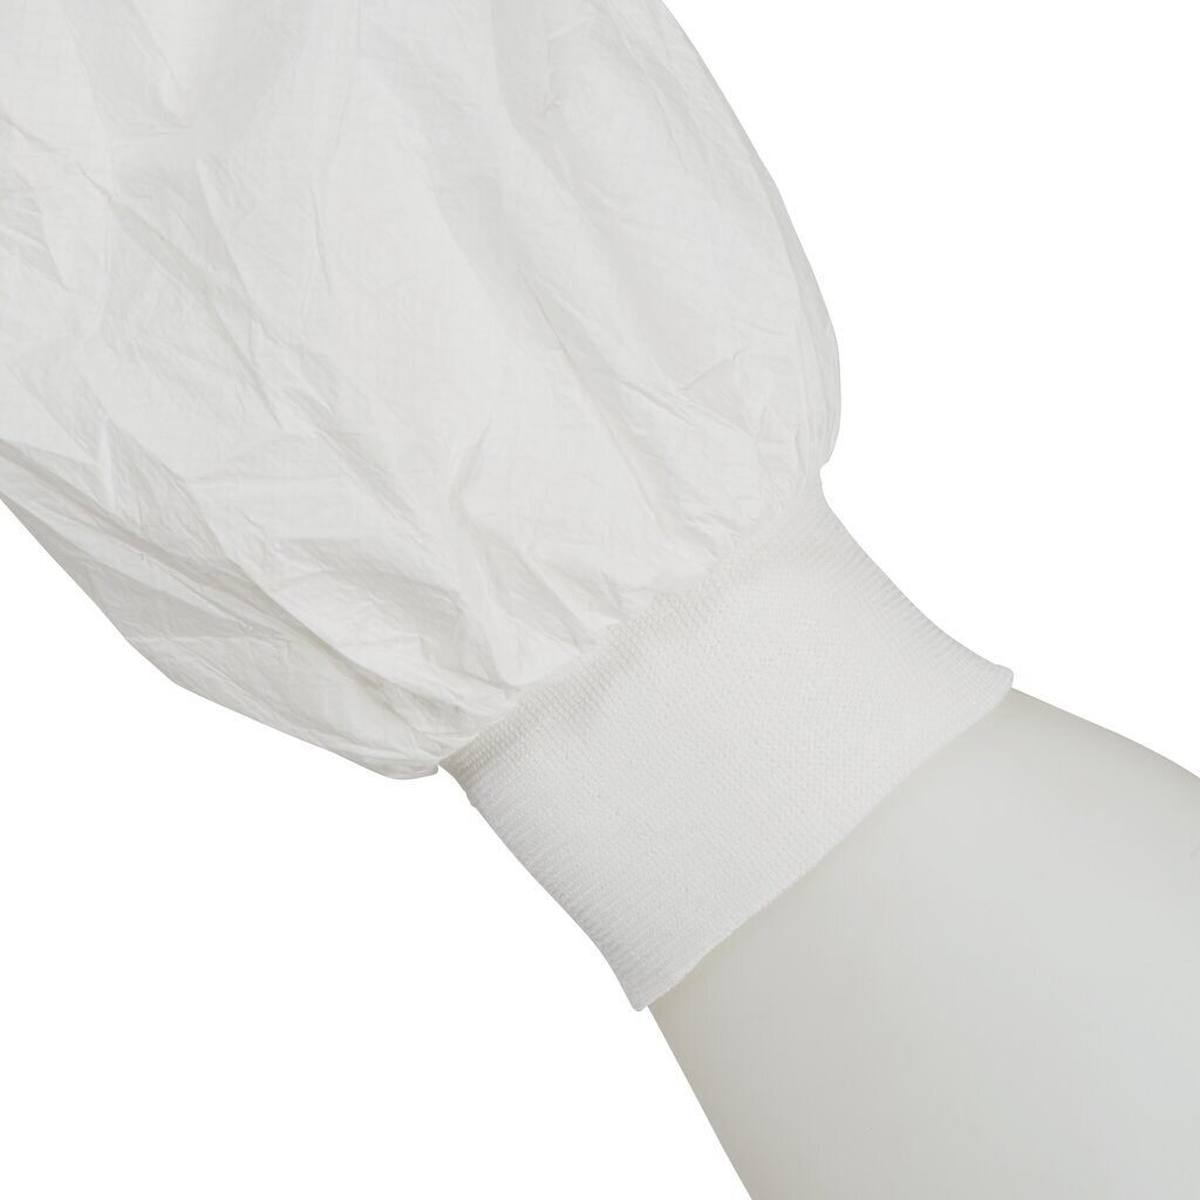 3M 4545 coverall, white, TYPE 5/6, size 2XL, material PE laminate, antistatic coating, particularly low-linting, detachable zipper, knitted cuffs